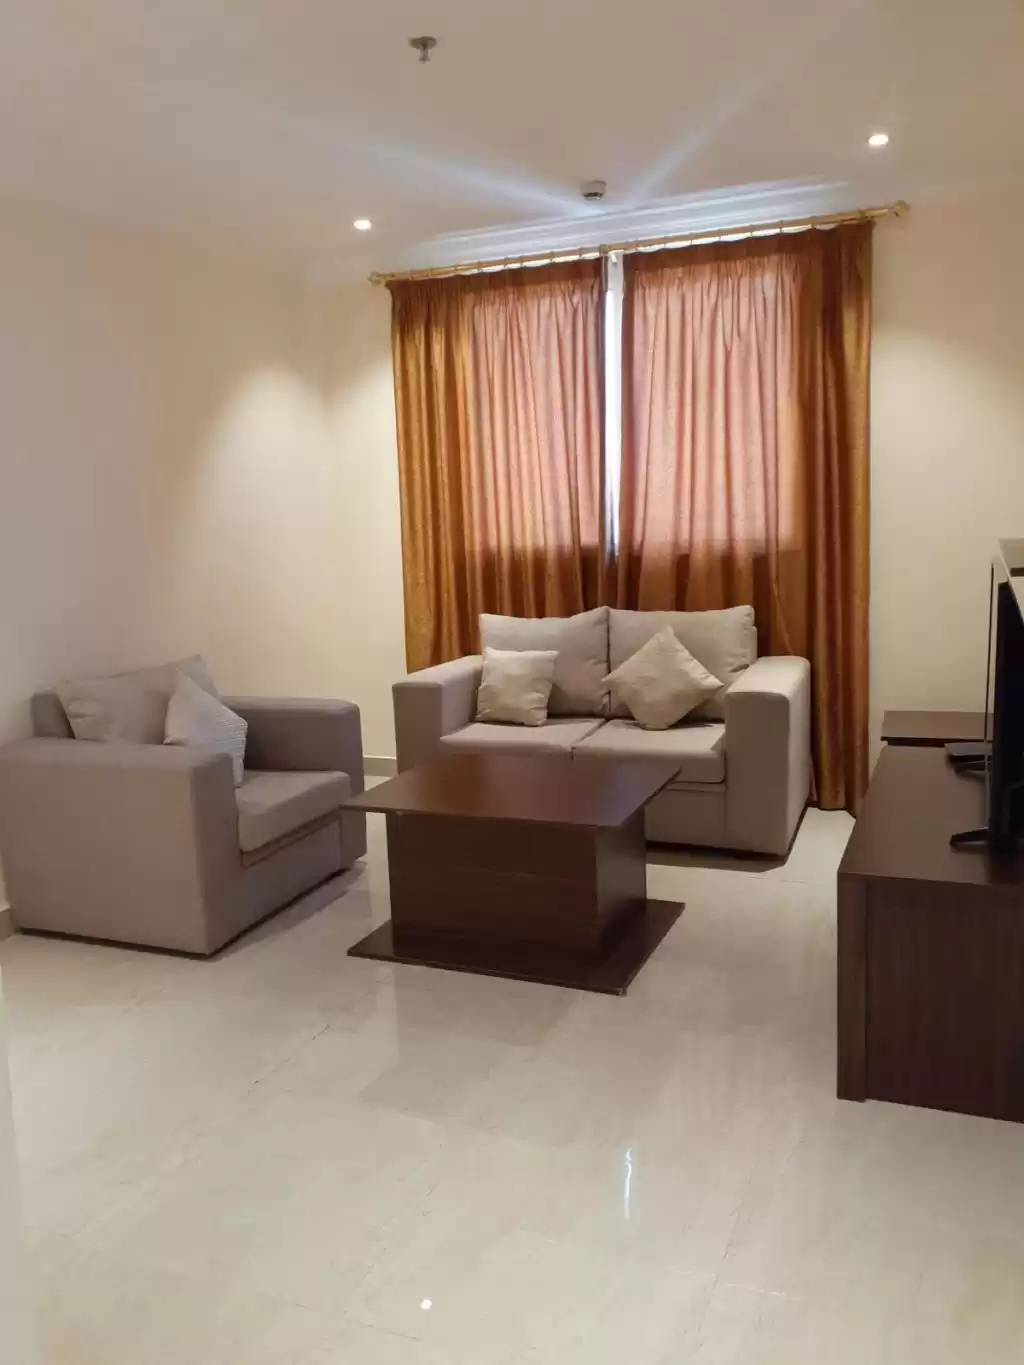 Residential Ready Property 1 Bedroom F/F Apartment  for rent in Al Sadd , Doha #14738 - 1  image 